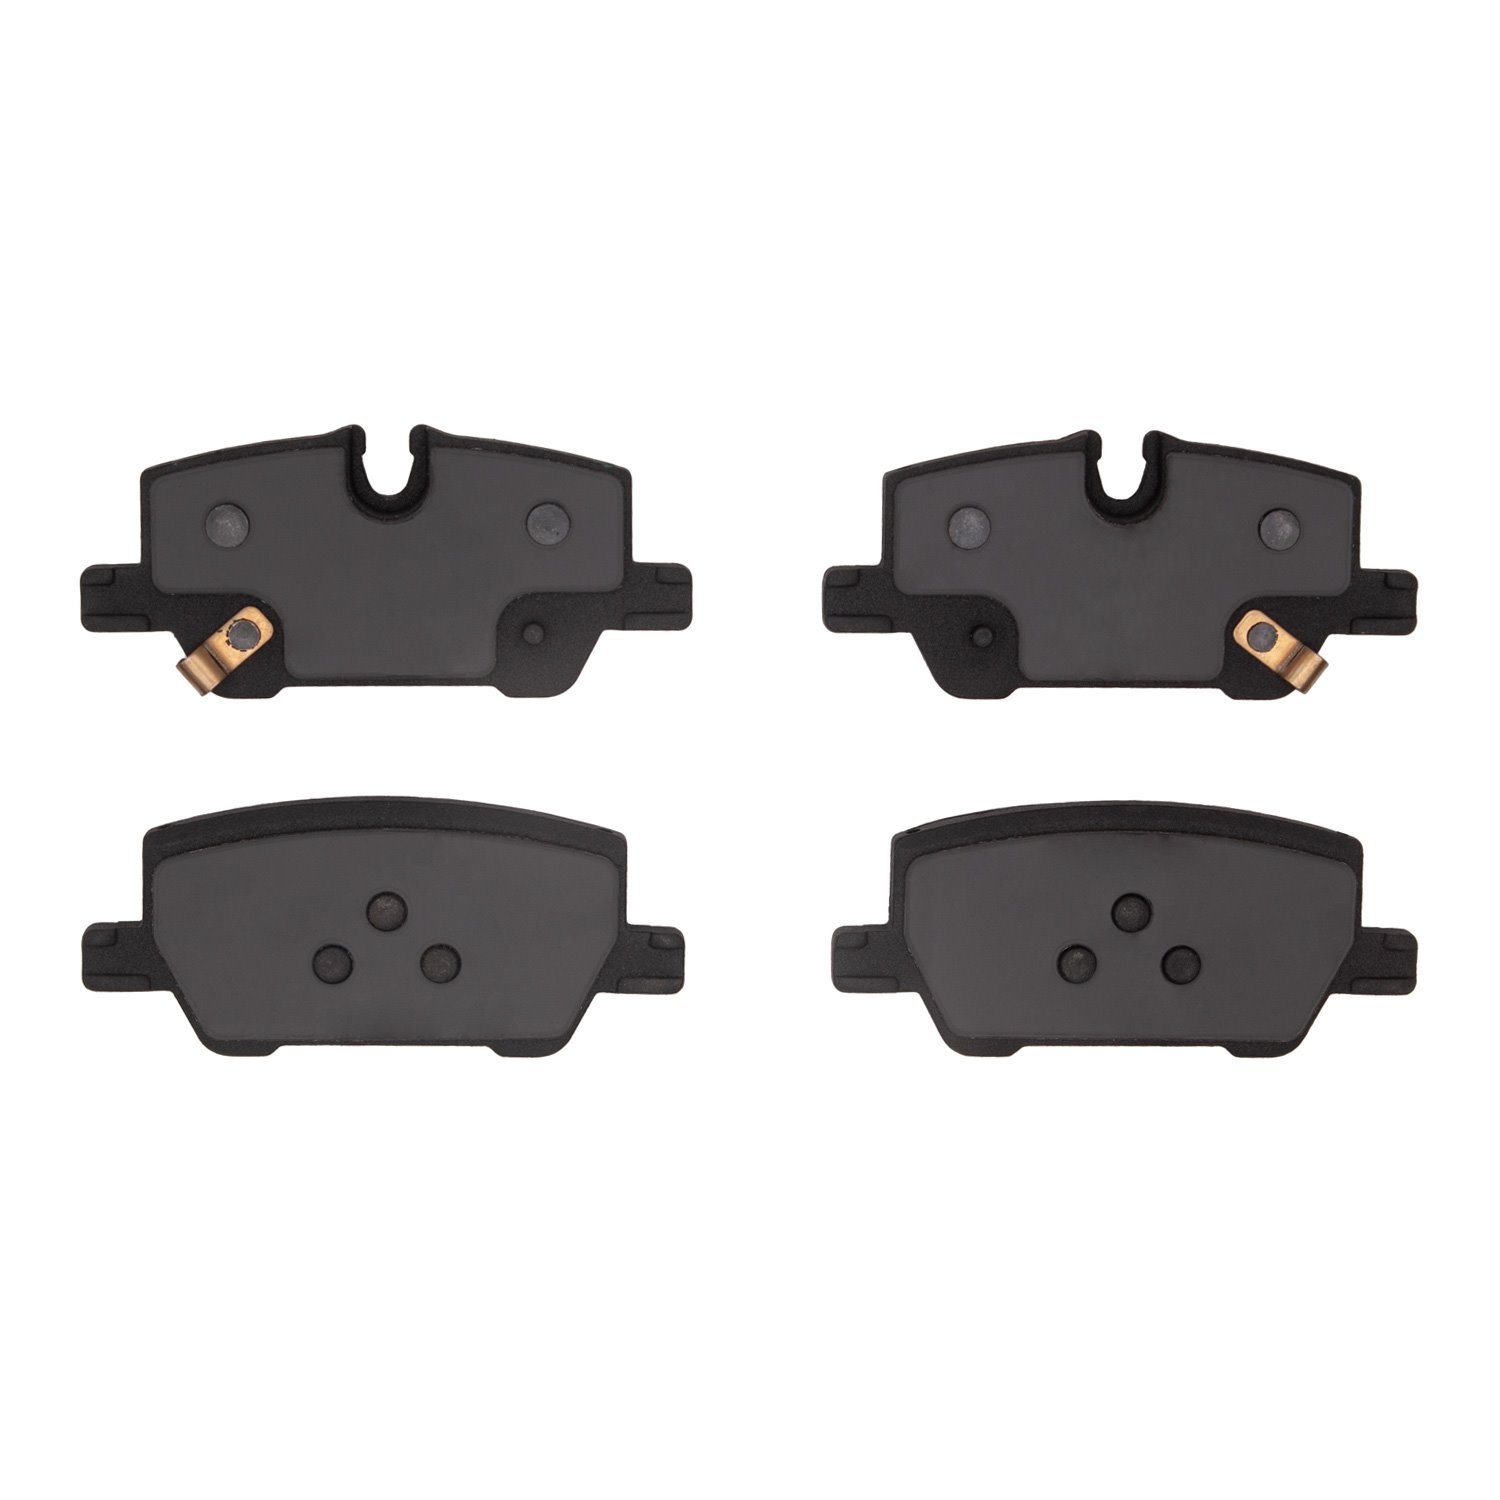 1310-2308-00 3000-Series Ceramic Brake Pads, Fits Select GM, Position: Rear